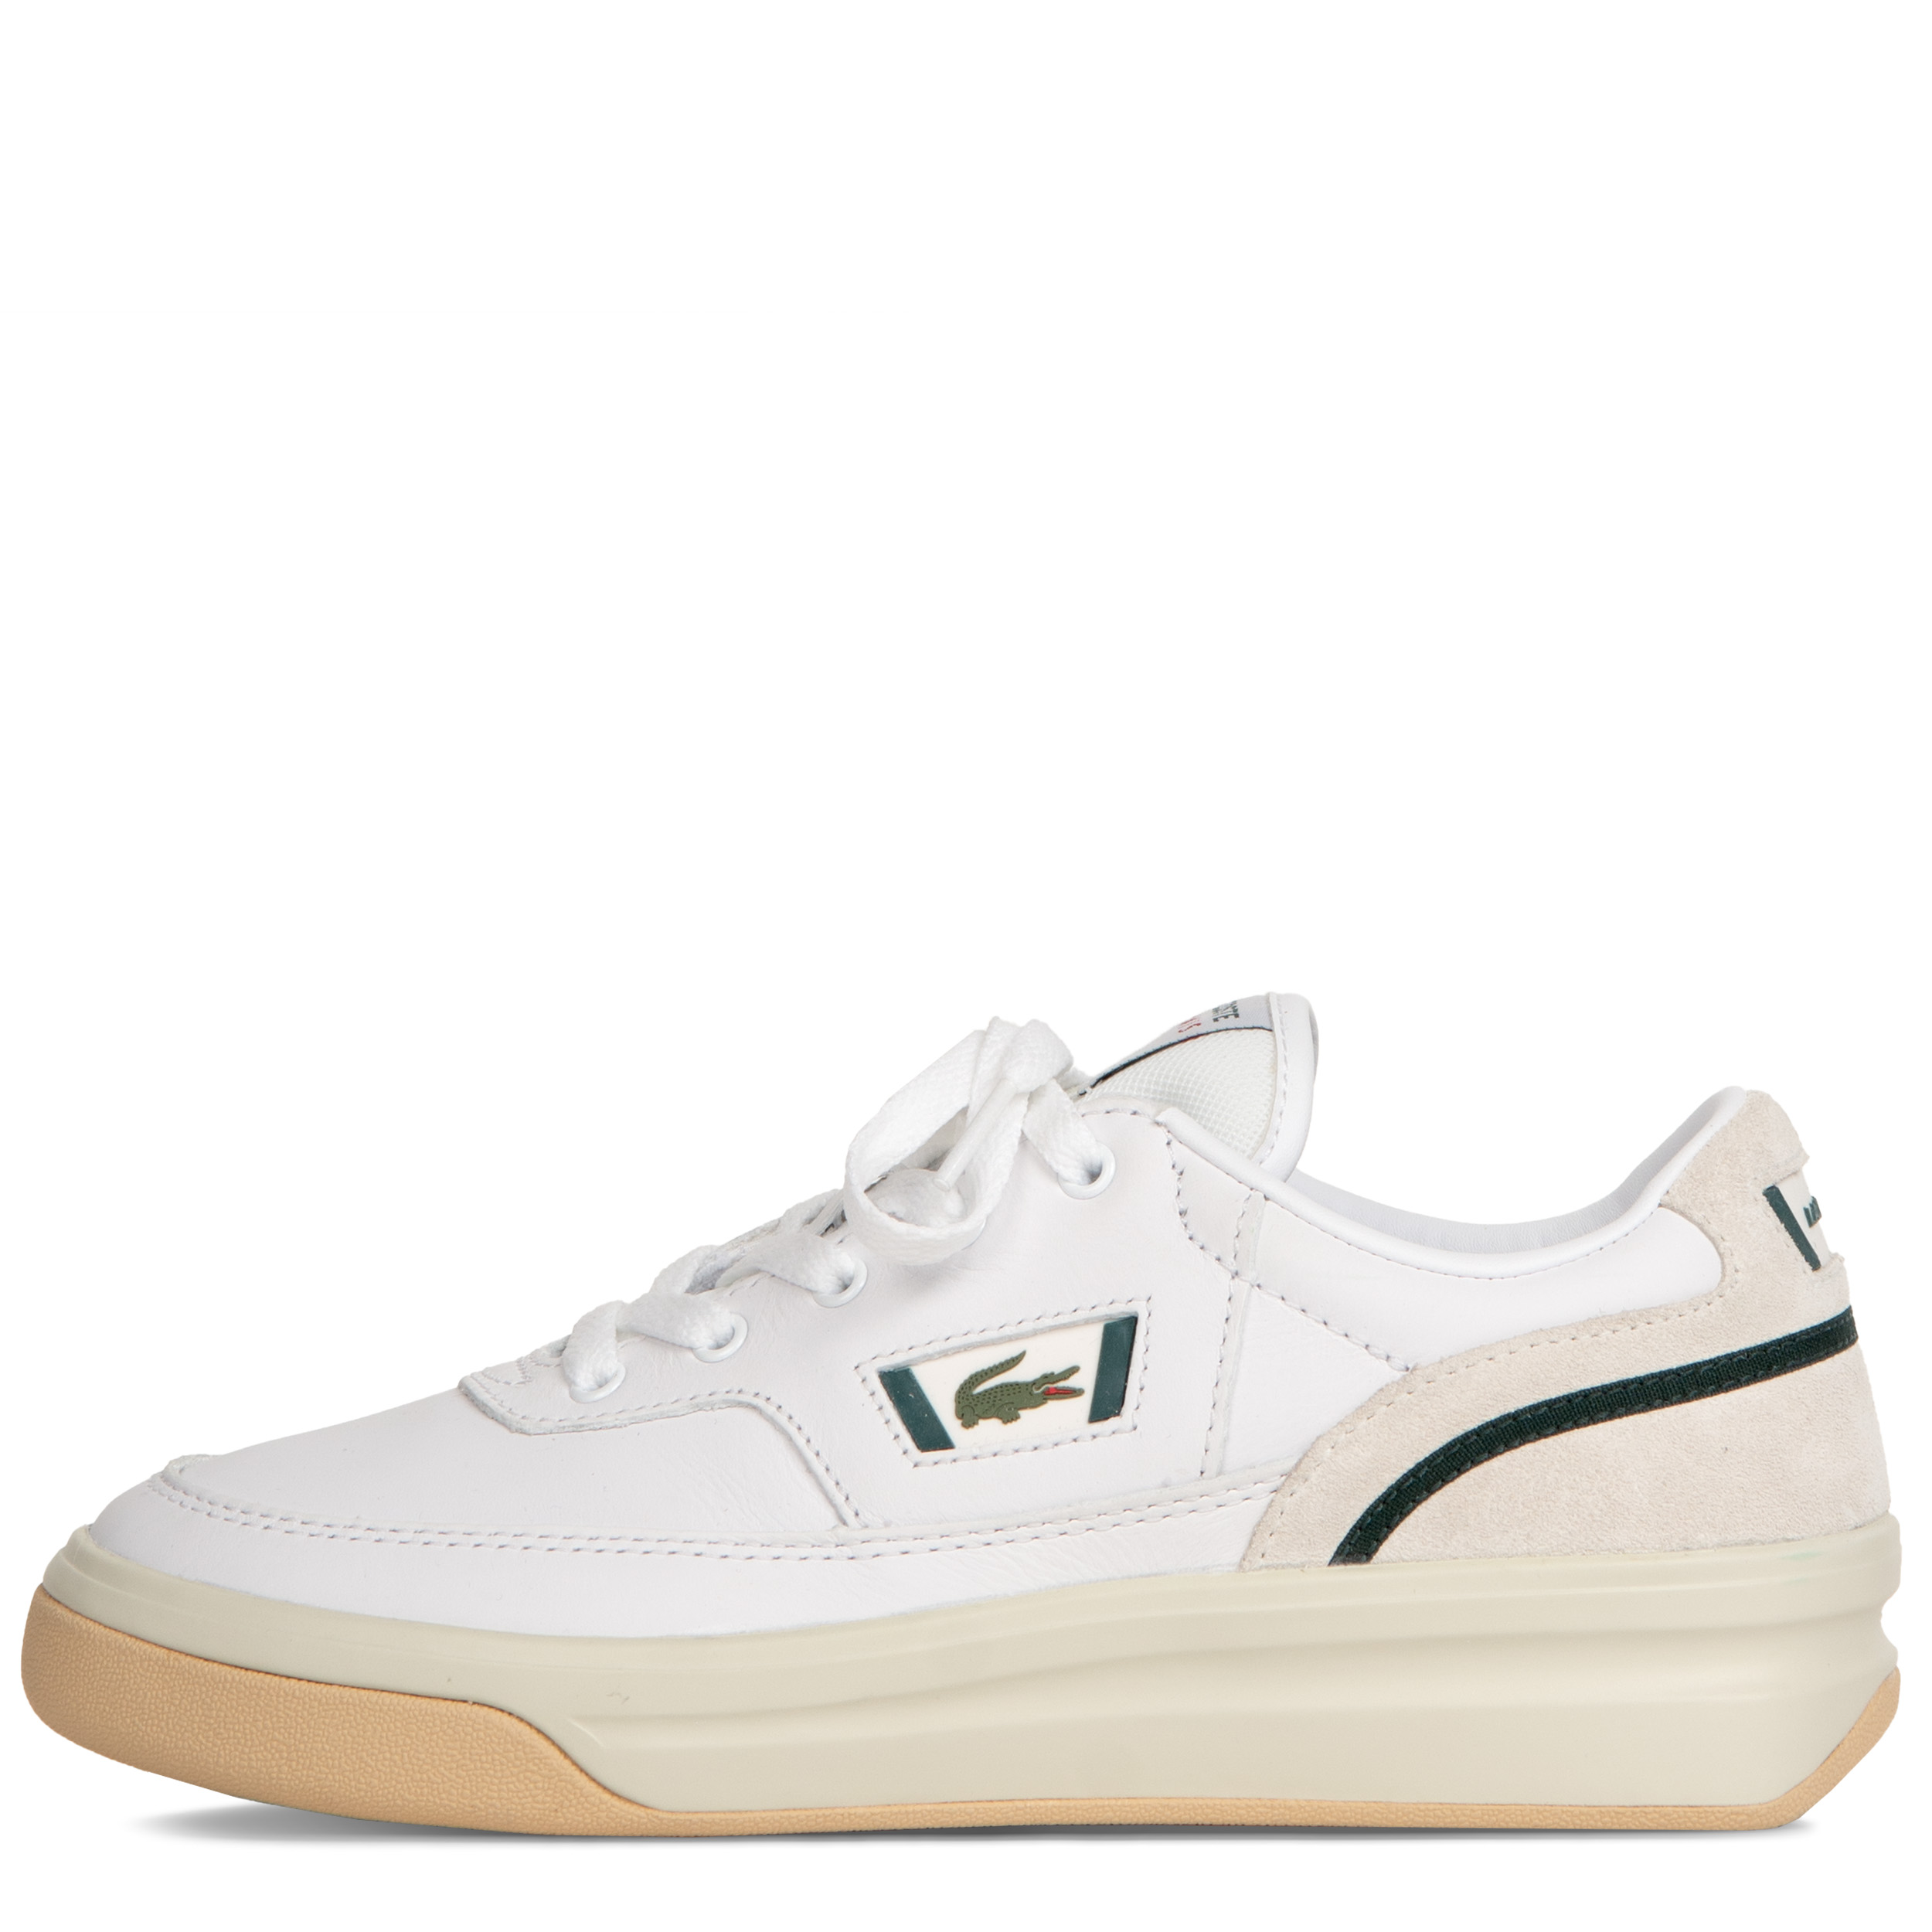 Lacoste G80 Casual Trainers White/Dark Green